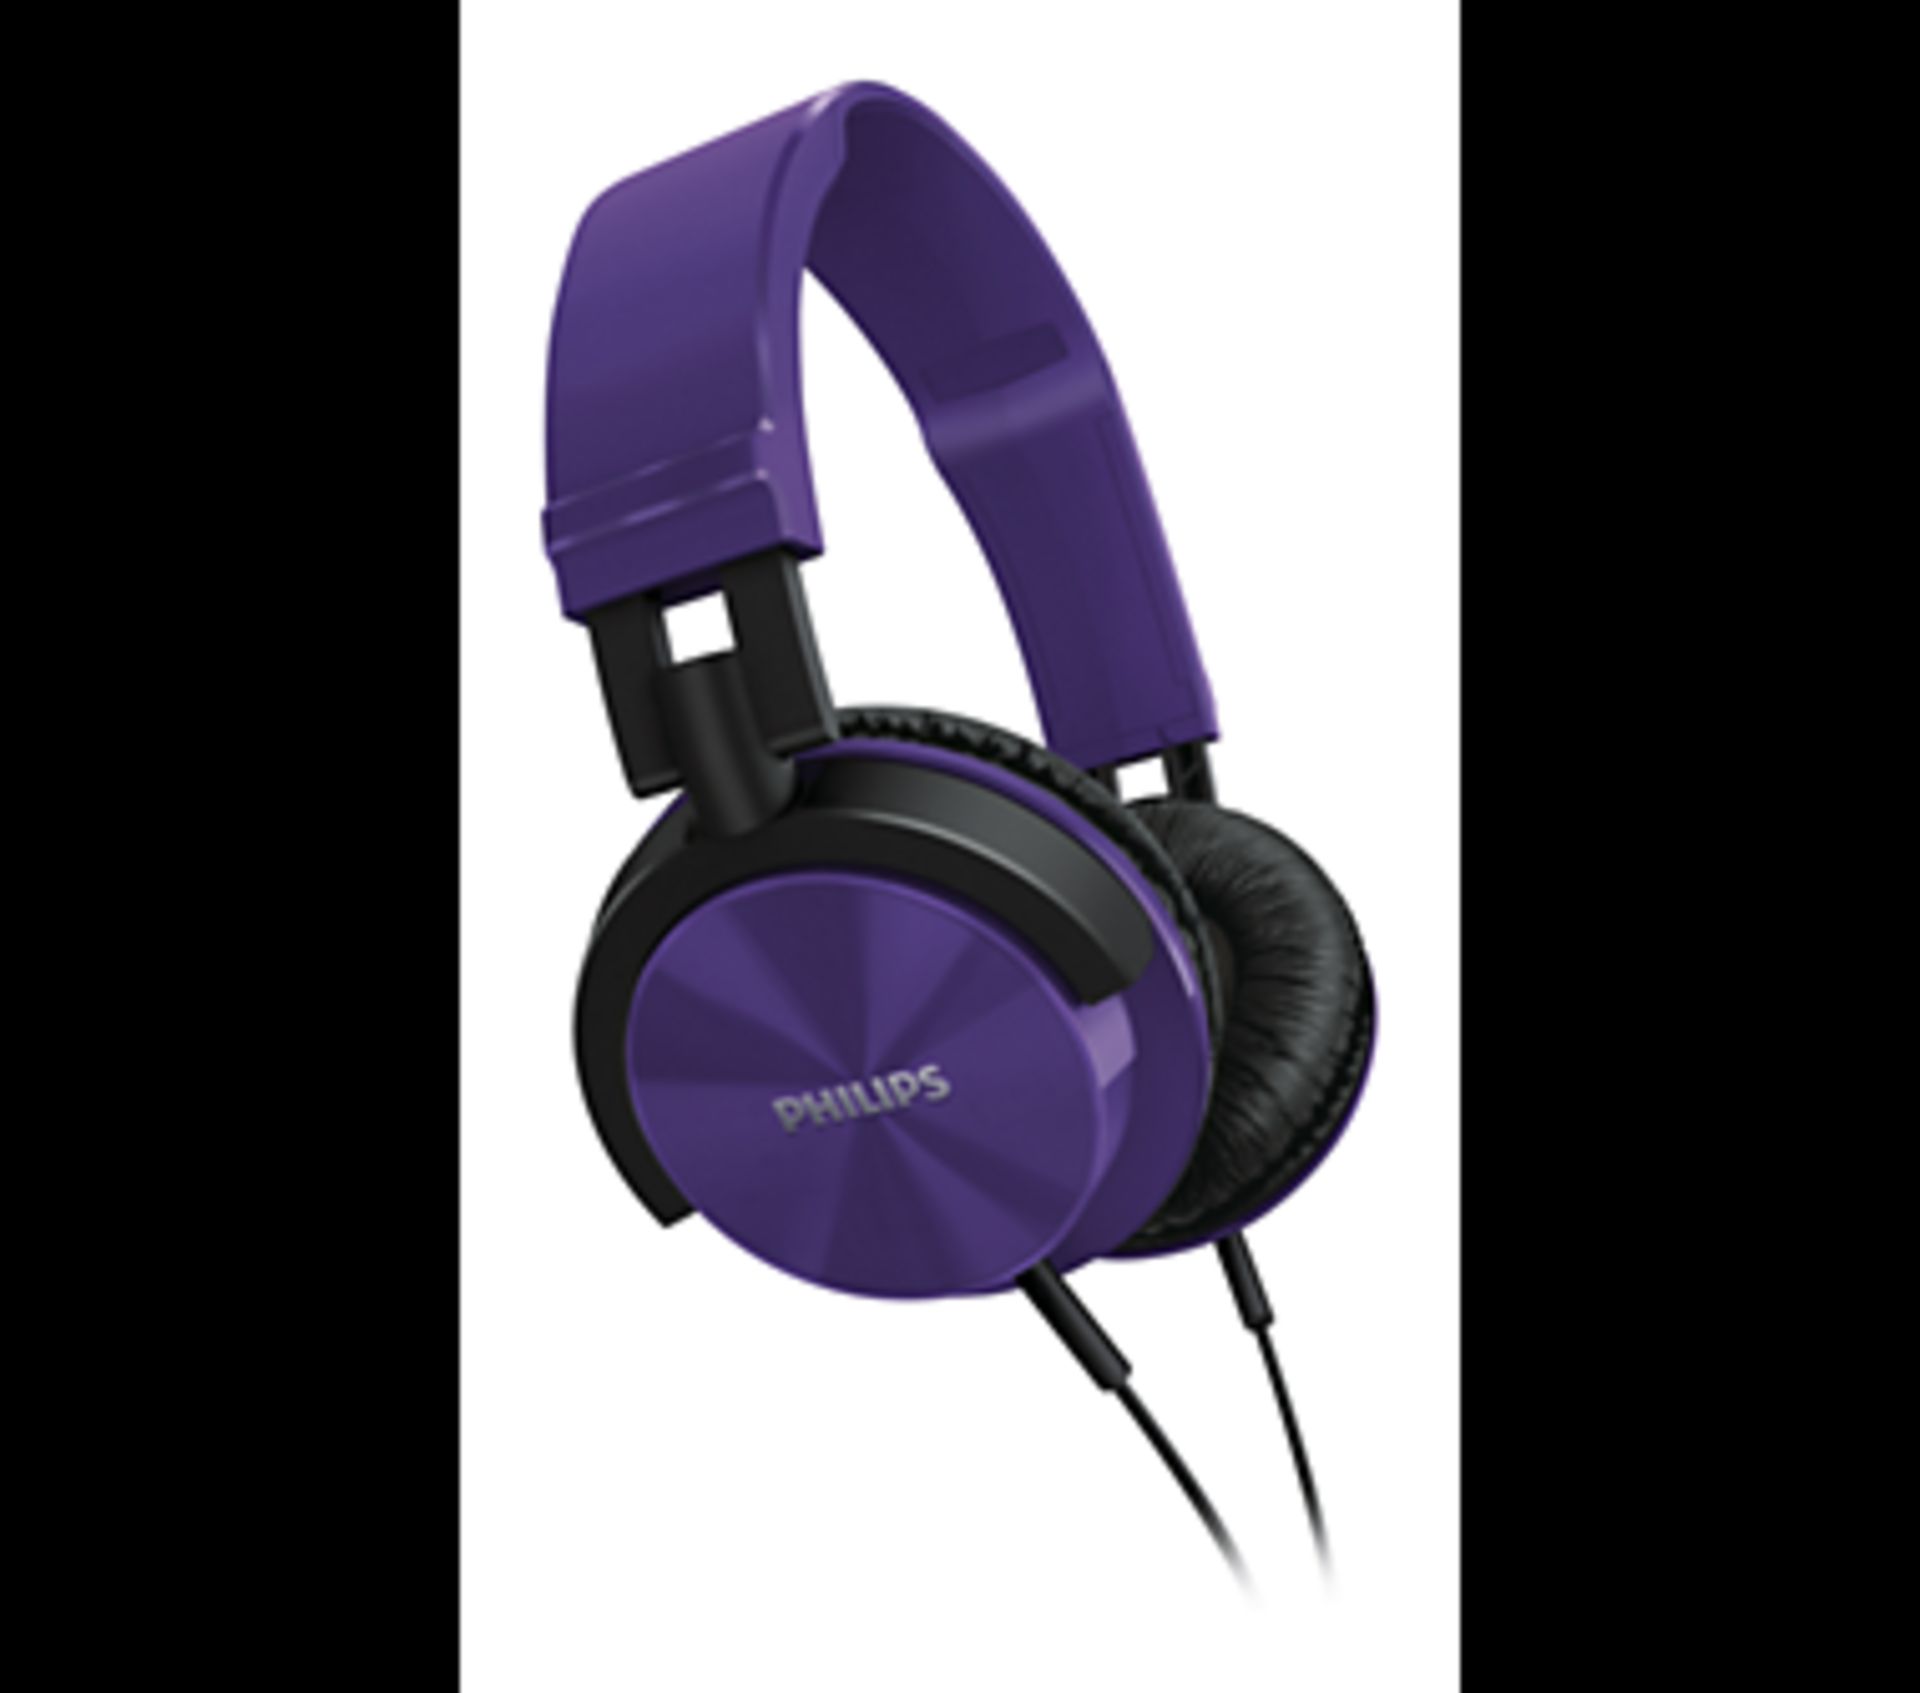 V Brand New Philips SHL3000pp DJ Headphones RRP £20 X 2 YOUR BID PRICE TO BE MULTIPLIED BY TWO